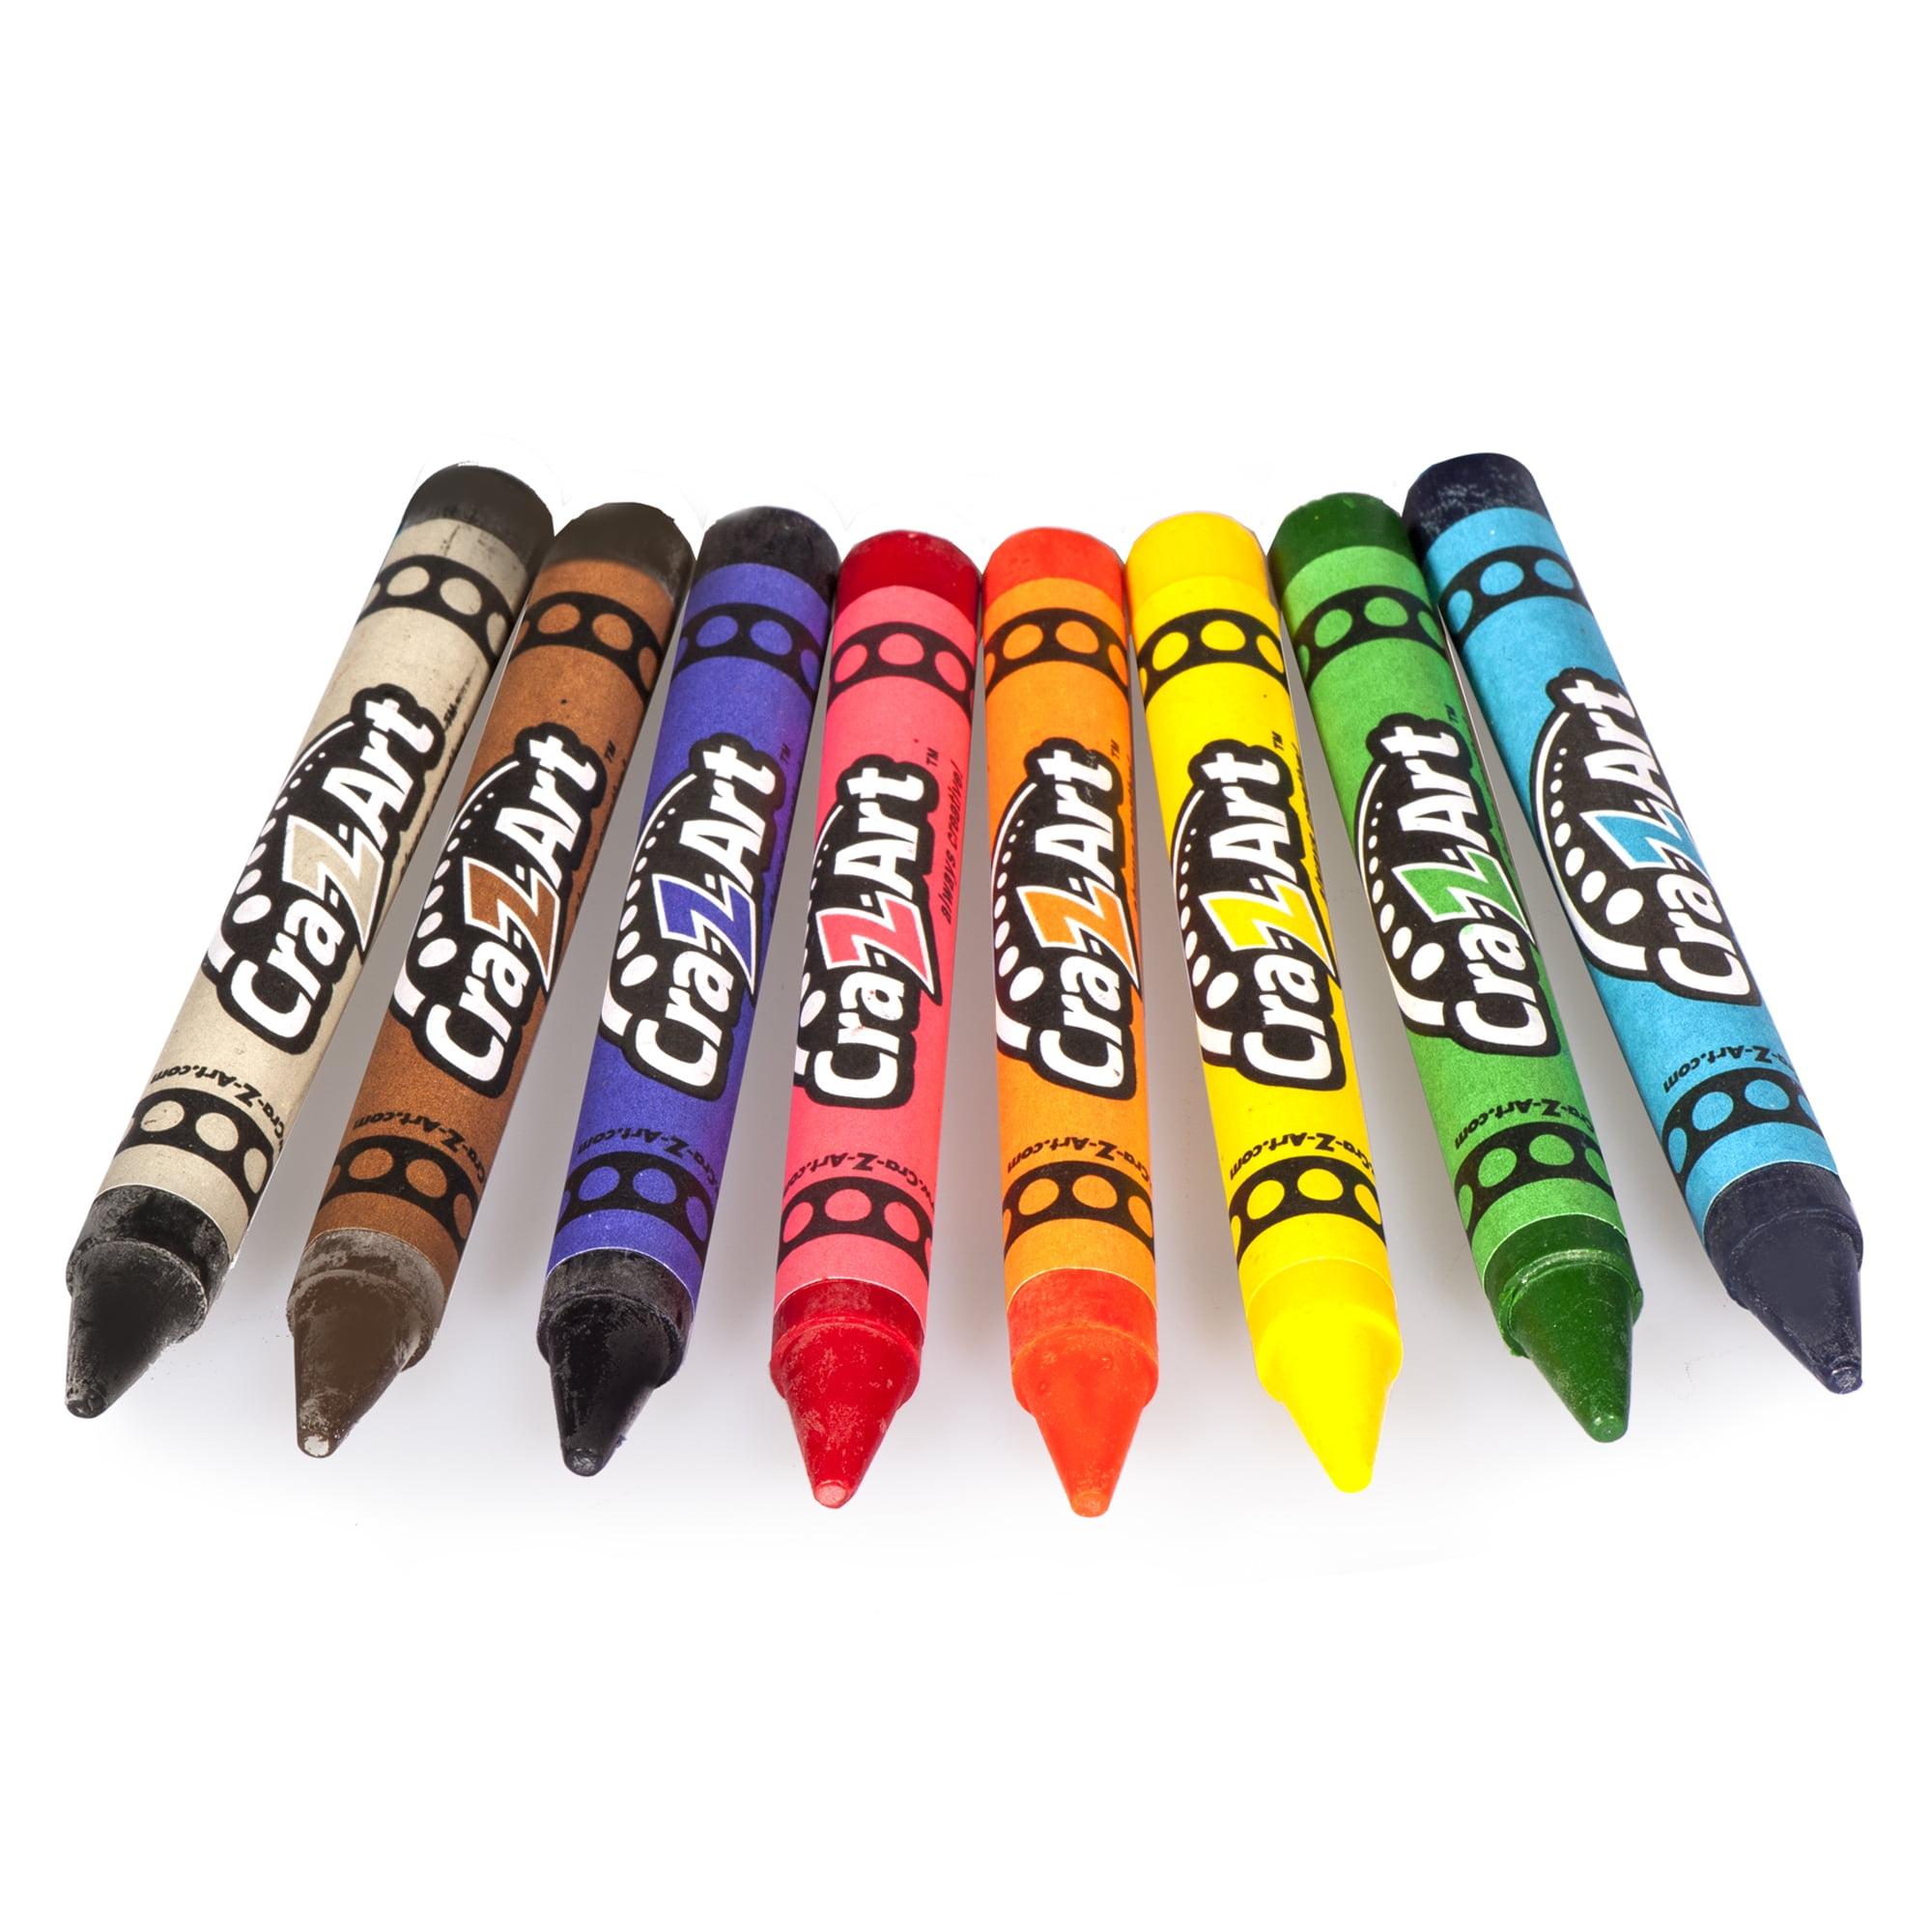 One Step UK - CRAYOLA My First CRAYOLA Jumbo Crayons (8 Pieces)  Multicoloured Price: BDT 490 Description: * Item dimensions L x W x H 13.8  x 11 x 1 centimetres *